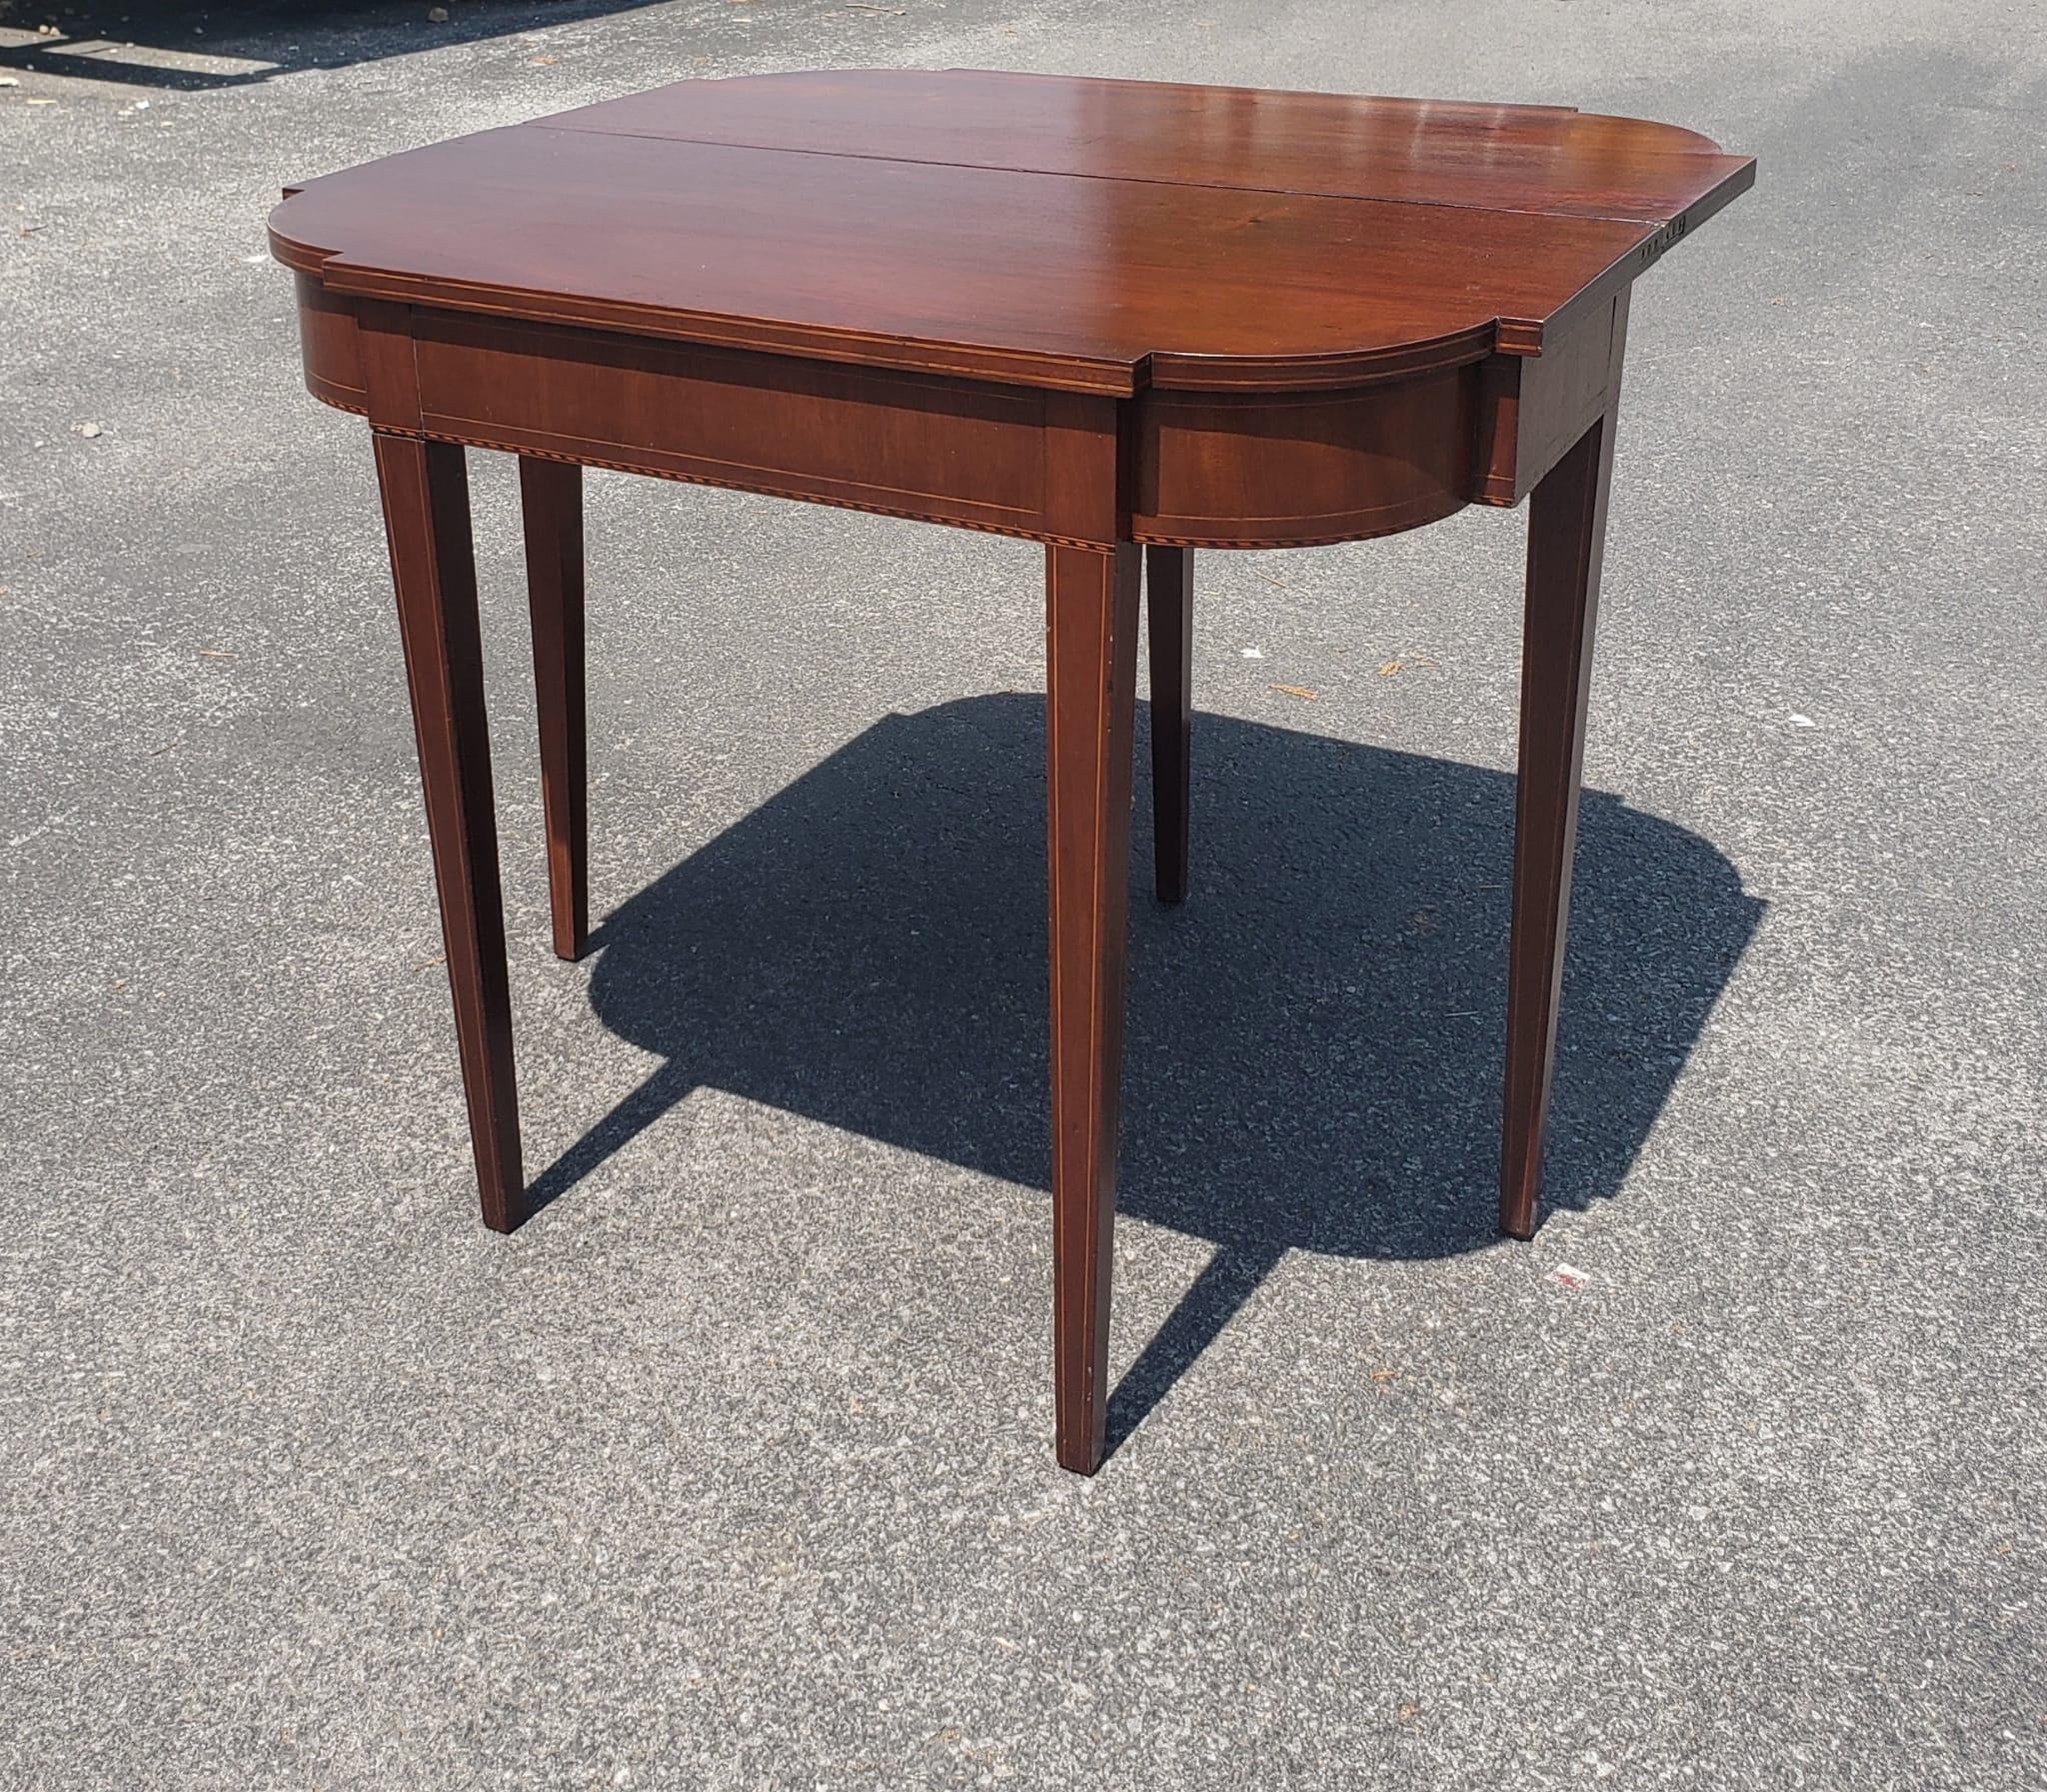 Federal Style Inlaid Mahogany Fold-Top Console Table, Circa 1920s For Sale 2